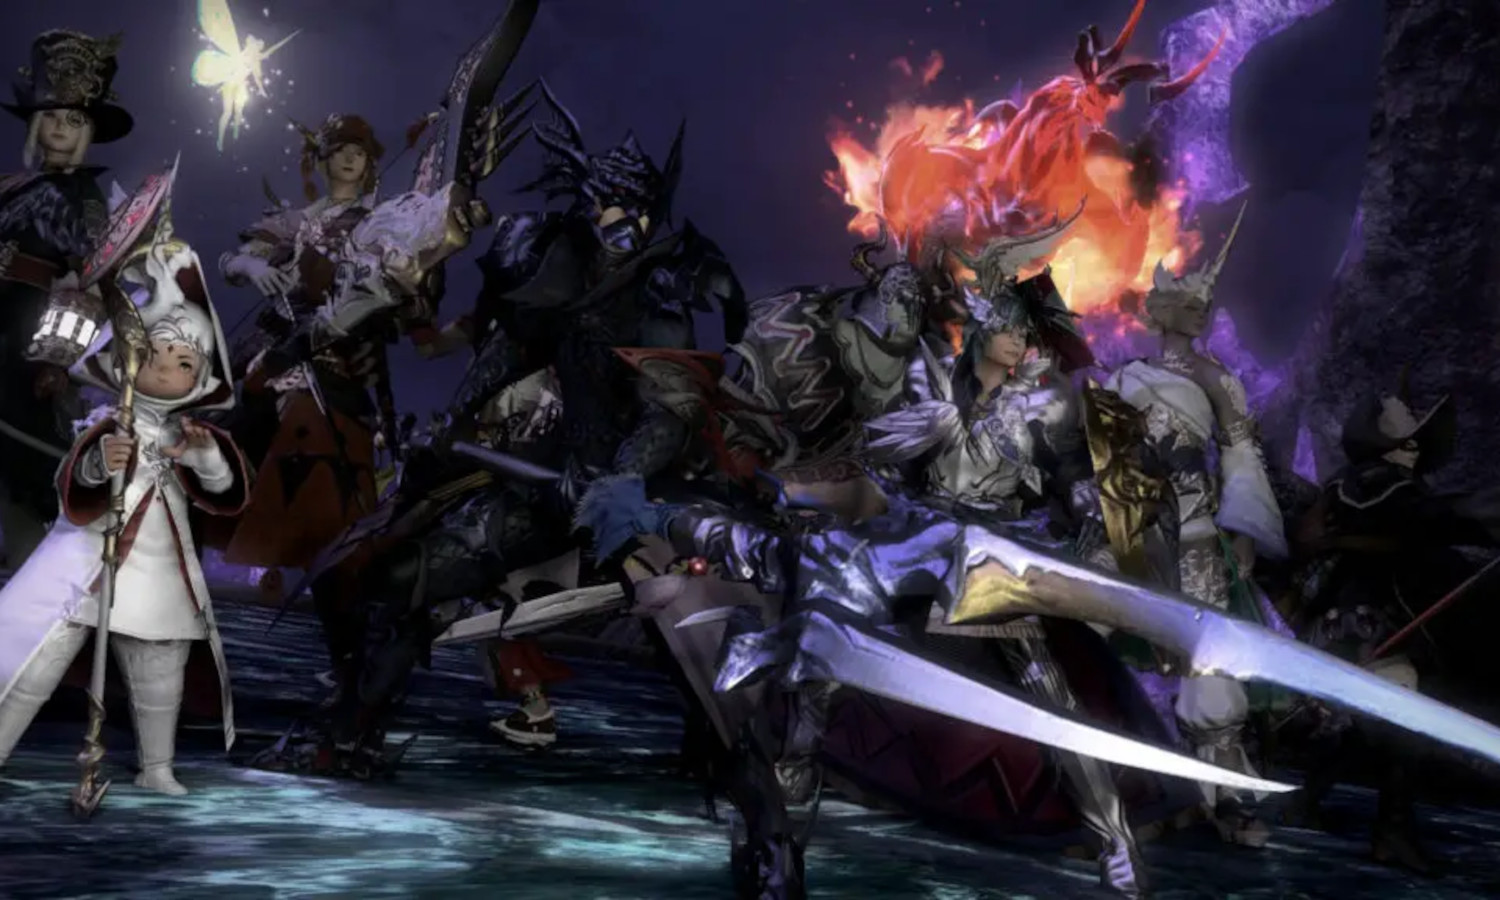 Final Fantasy 14: An online game worth seeing? Here is our analysis